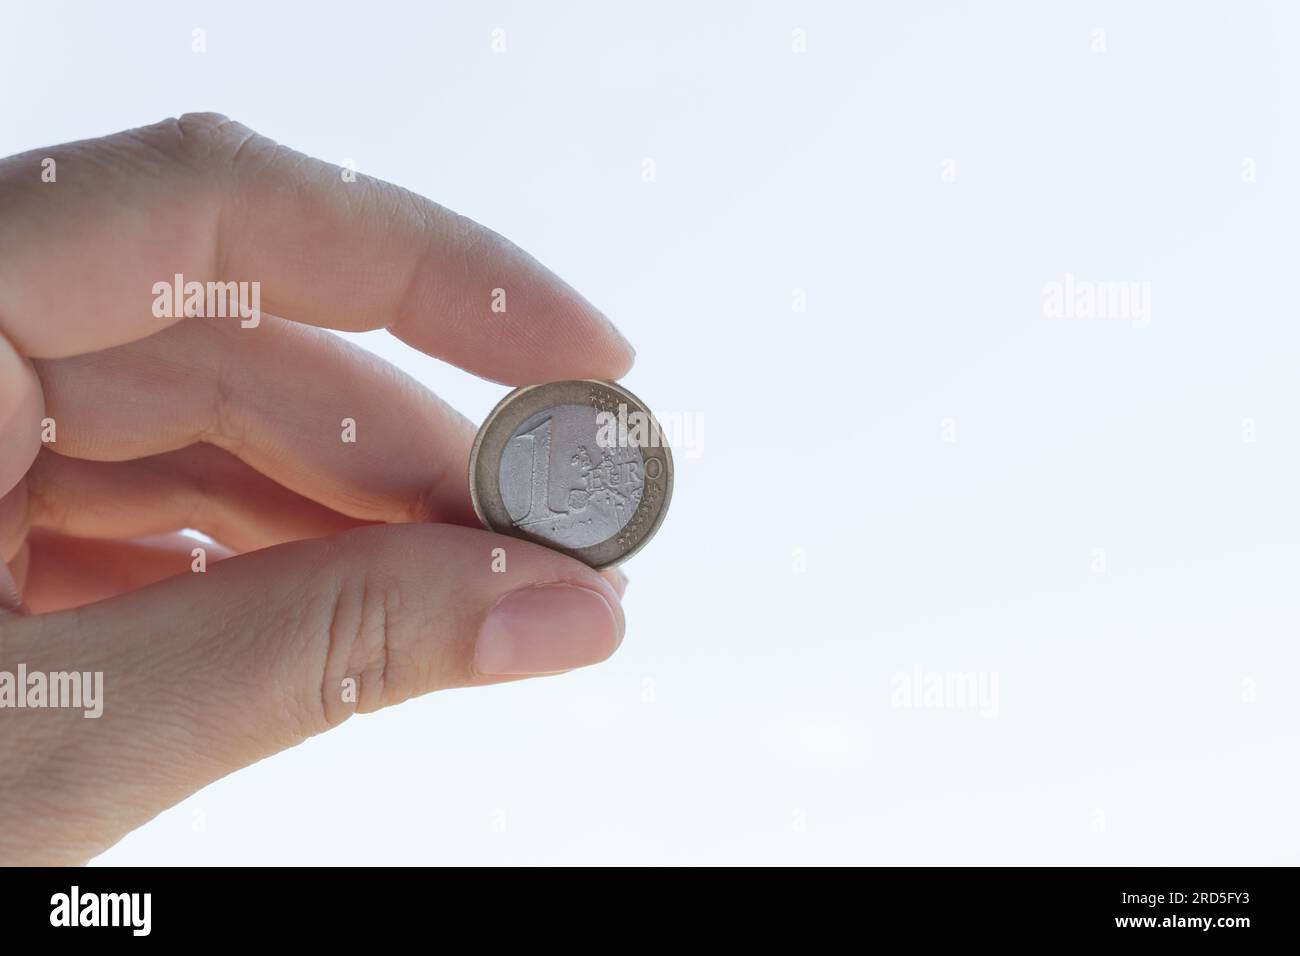 1 euro coin in hand close-up. Cash coin in hand on a white background. Stock Photo